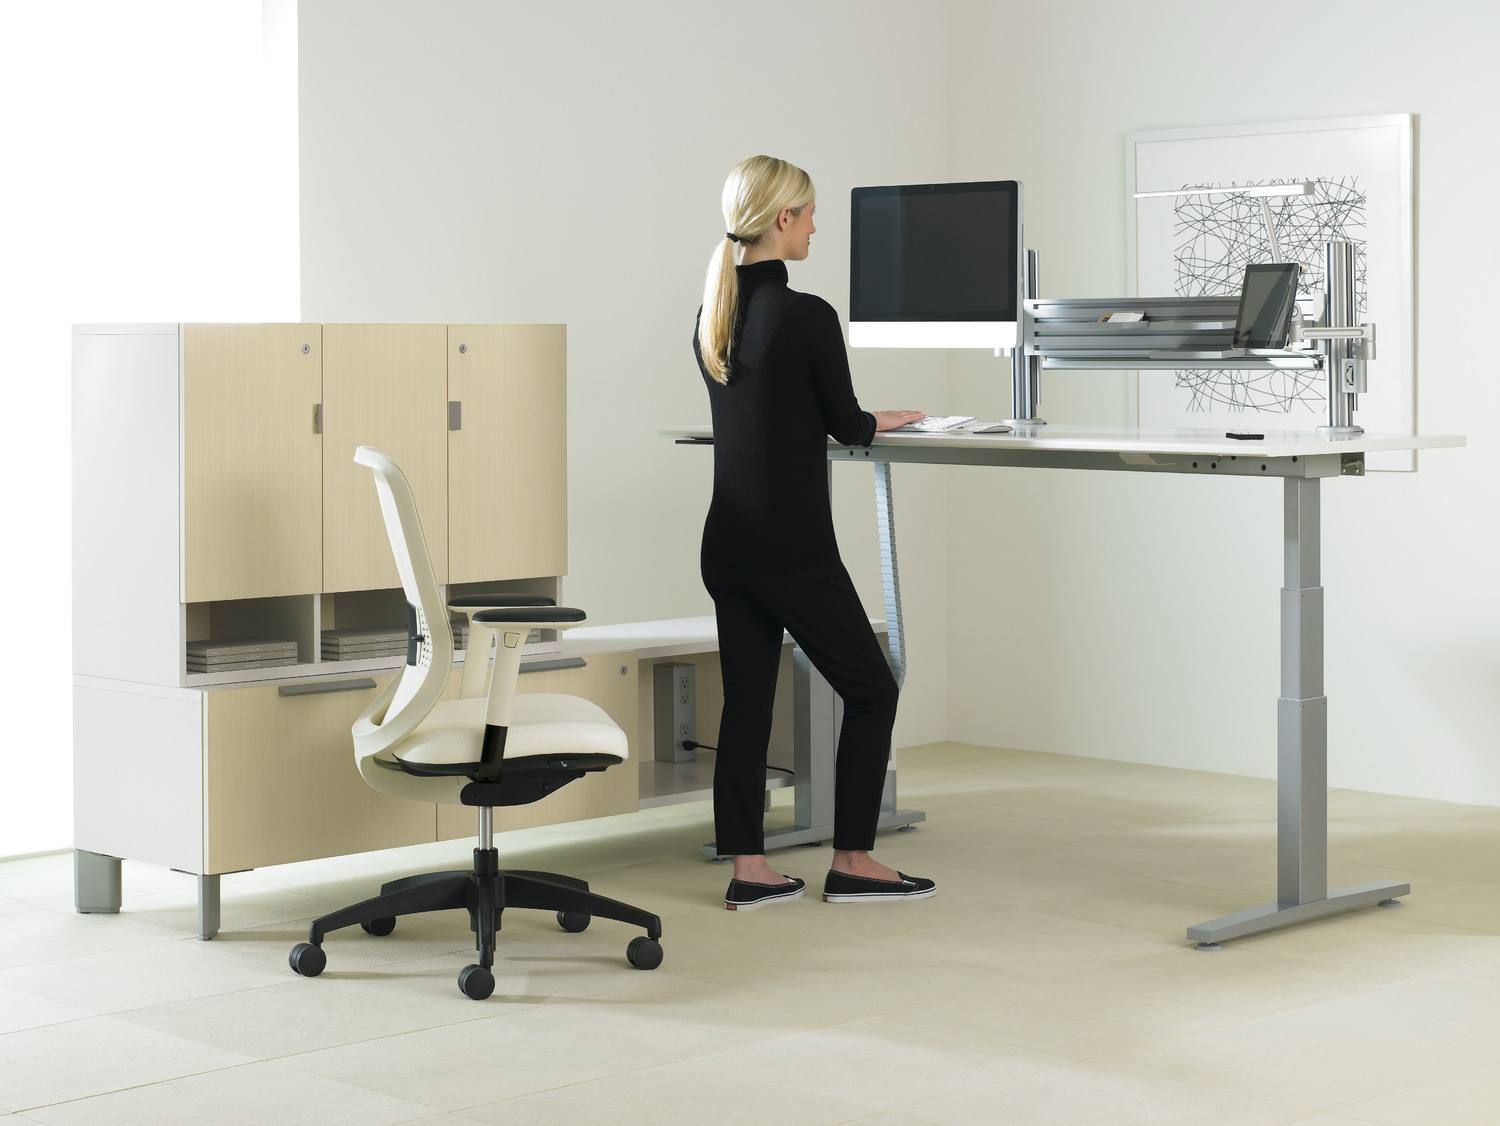 6 Realities About Standing Desks No One Will Tell You